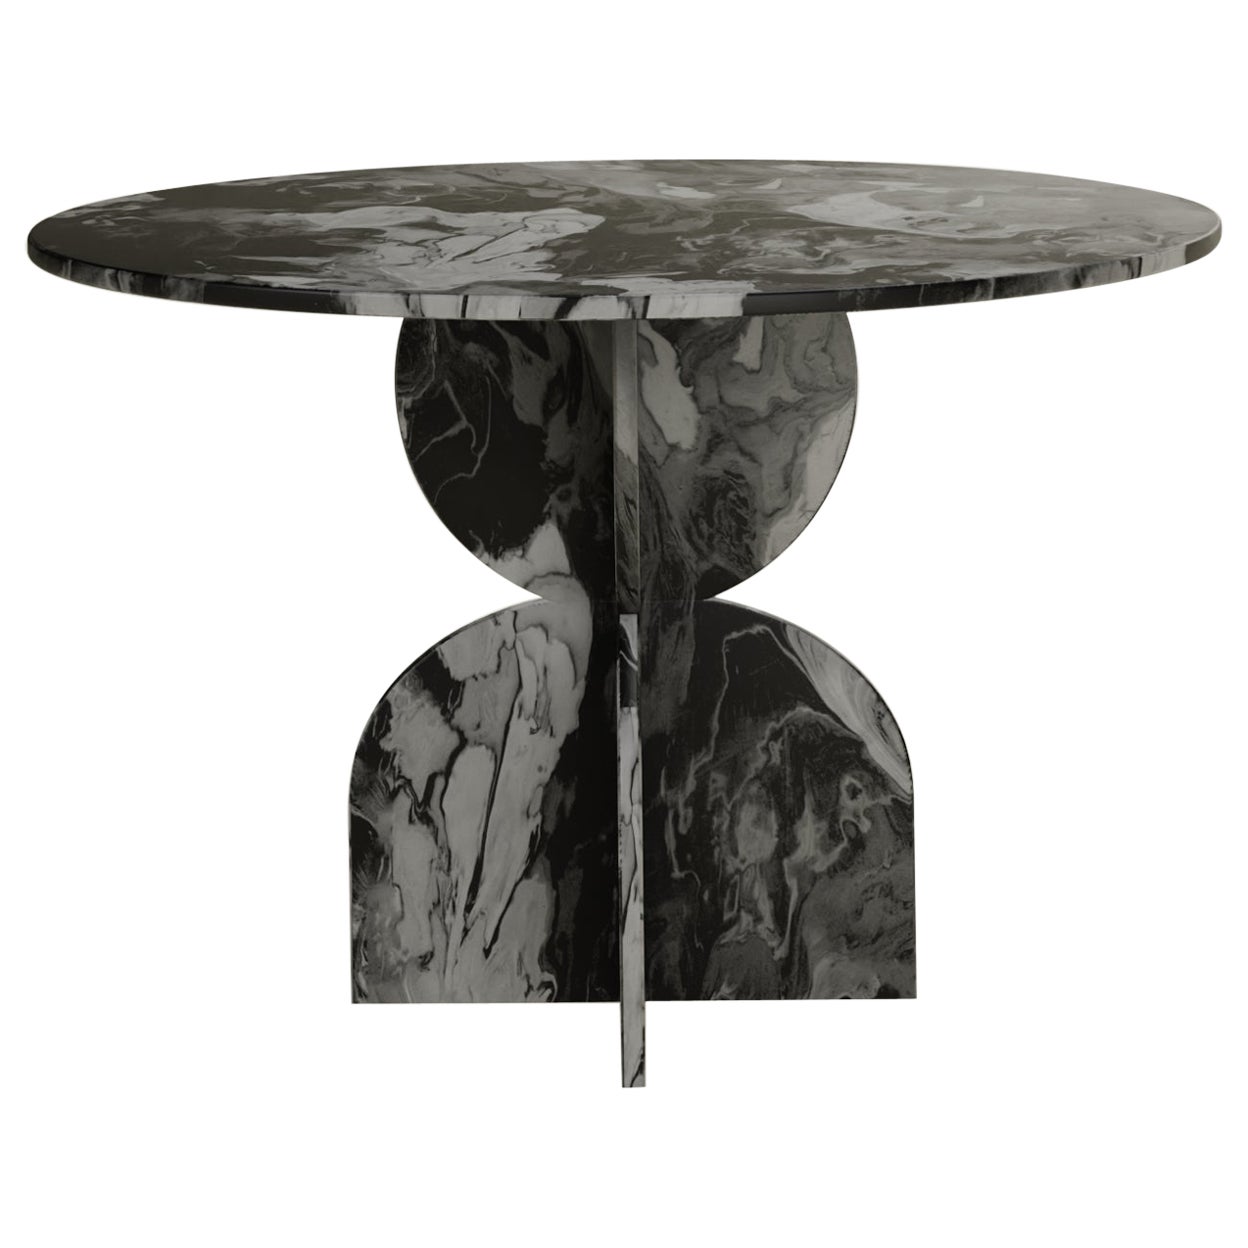 Contemporary Black Round Table Handcrafted 100% Recycled Plastic by Anqa Studios